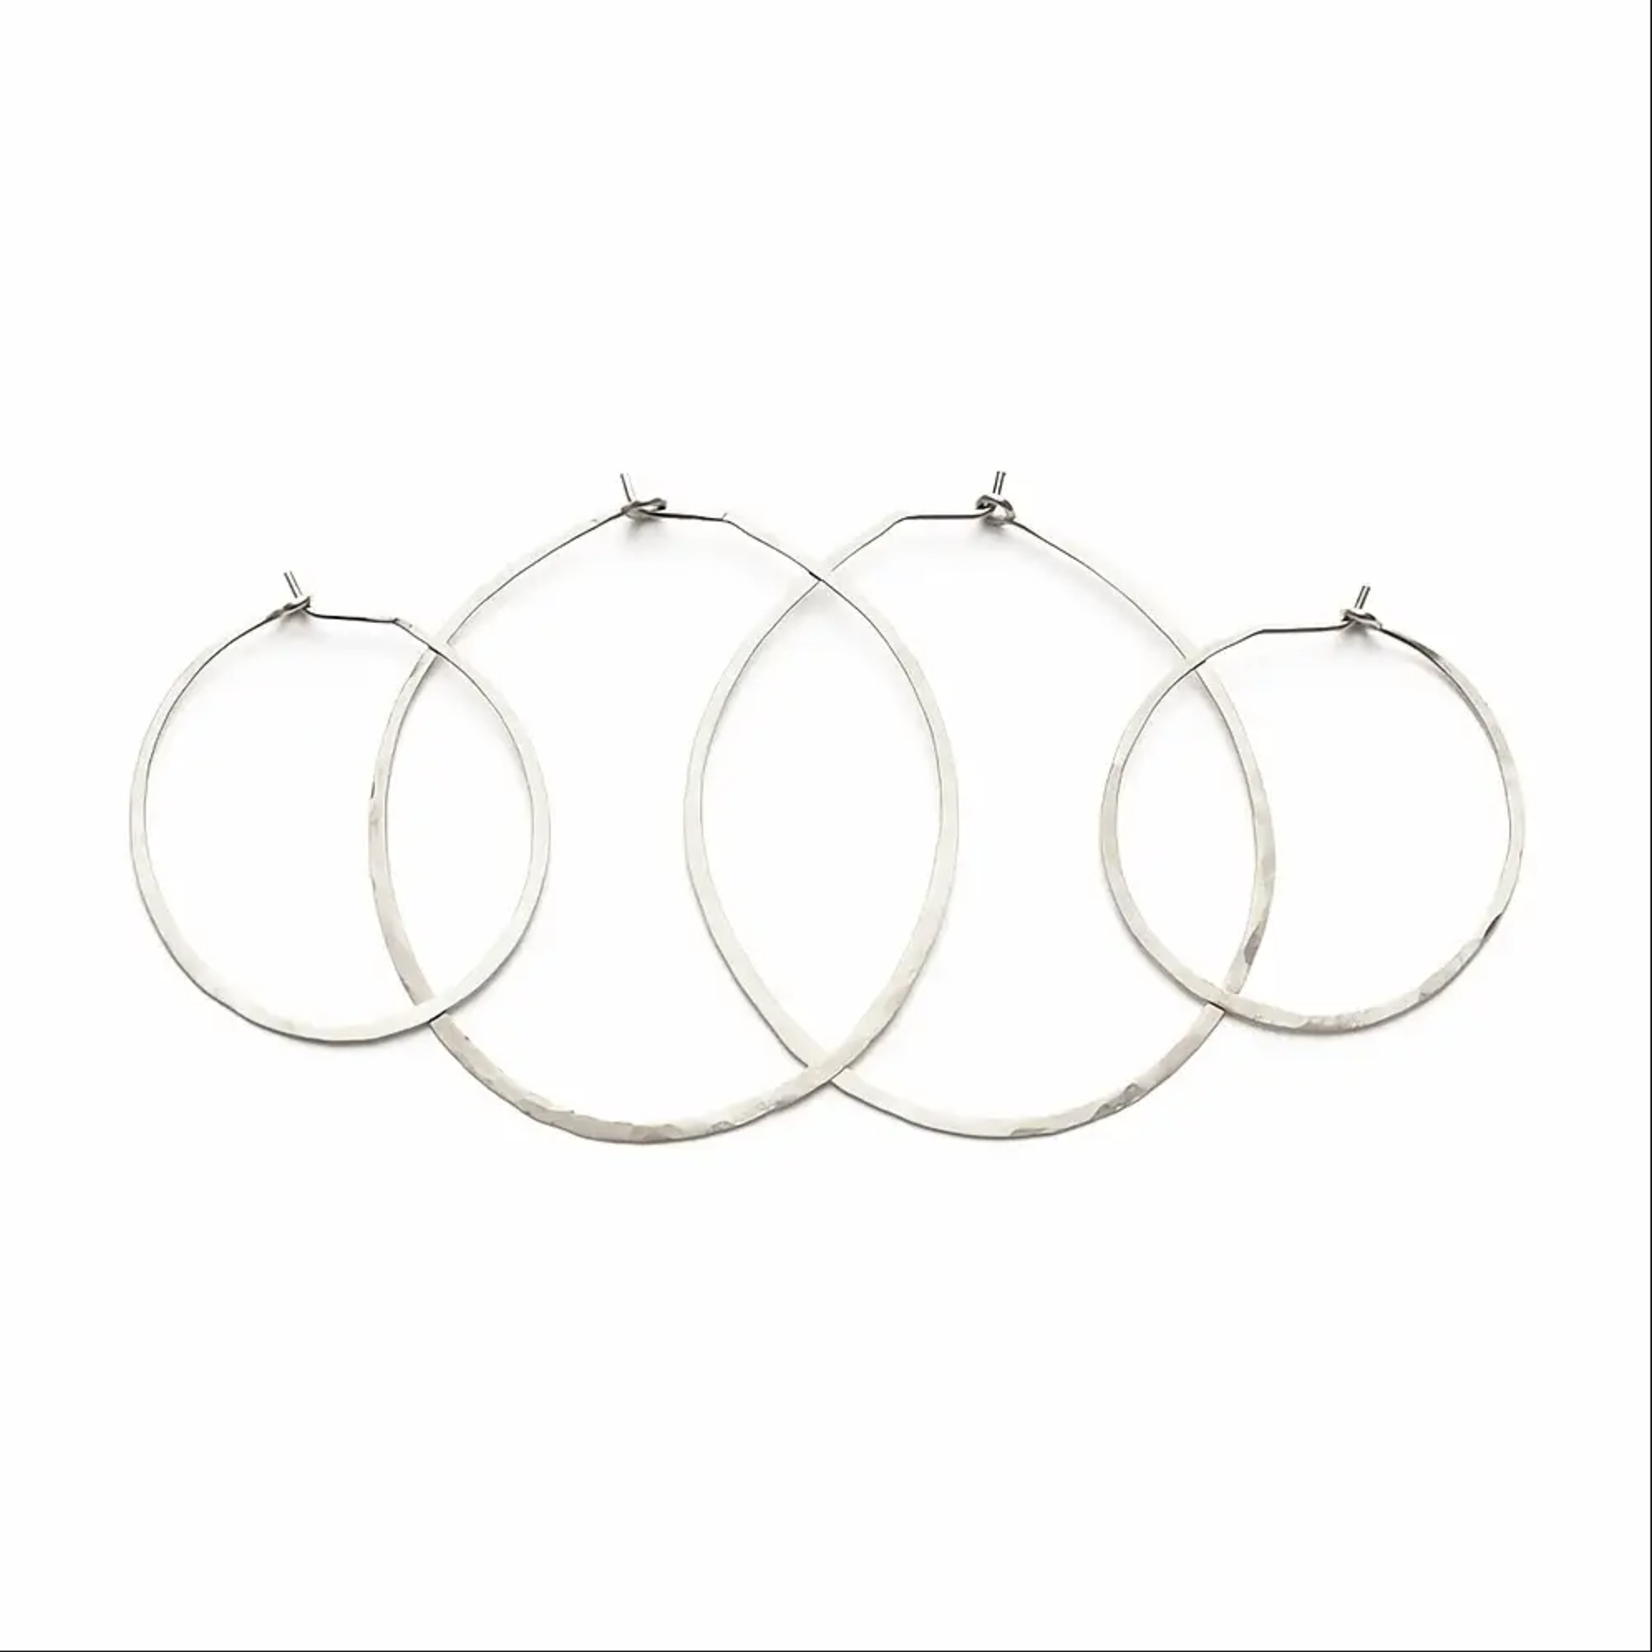 Hand Formed Hoops 2.5" Silver